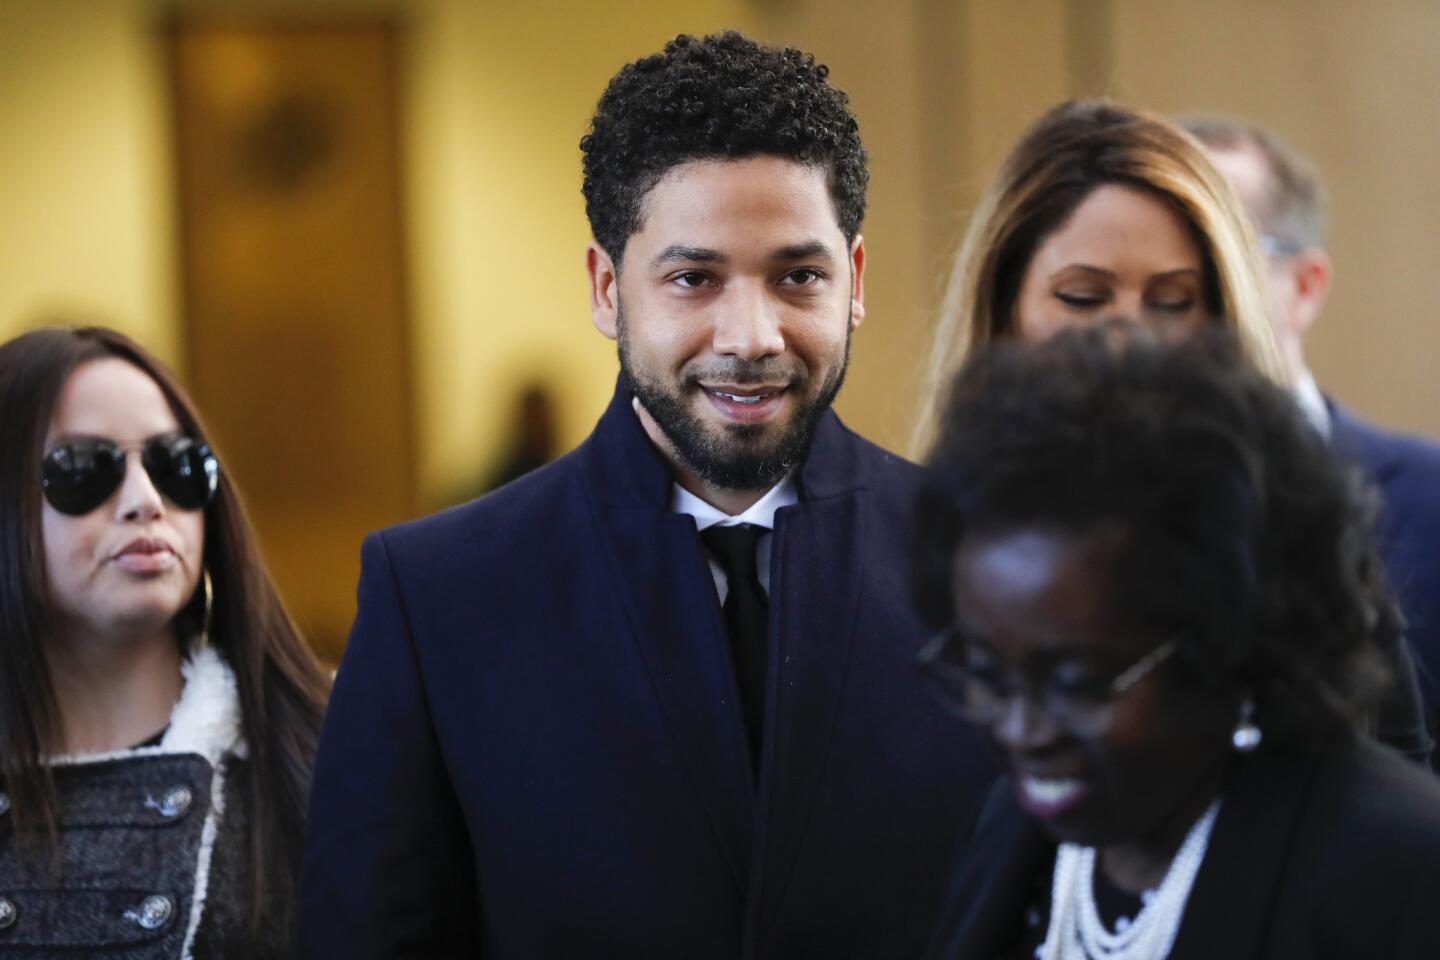 Jussie Smollett cracks a smile as he walks out to speak to the media after all charges against him are dropped at the Leighton Criminal Court Building in Chicago on March 26, 2019.